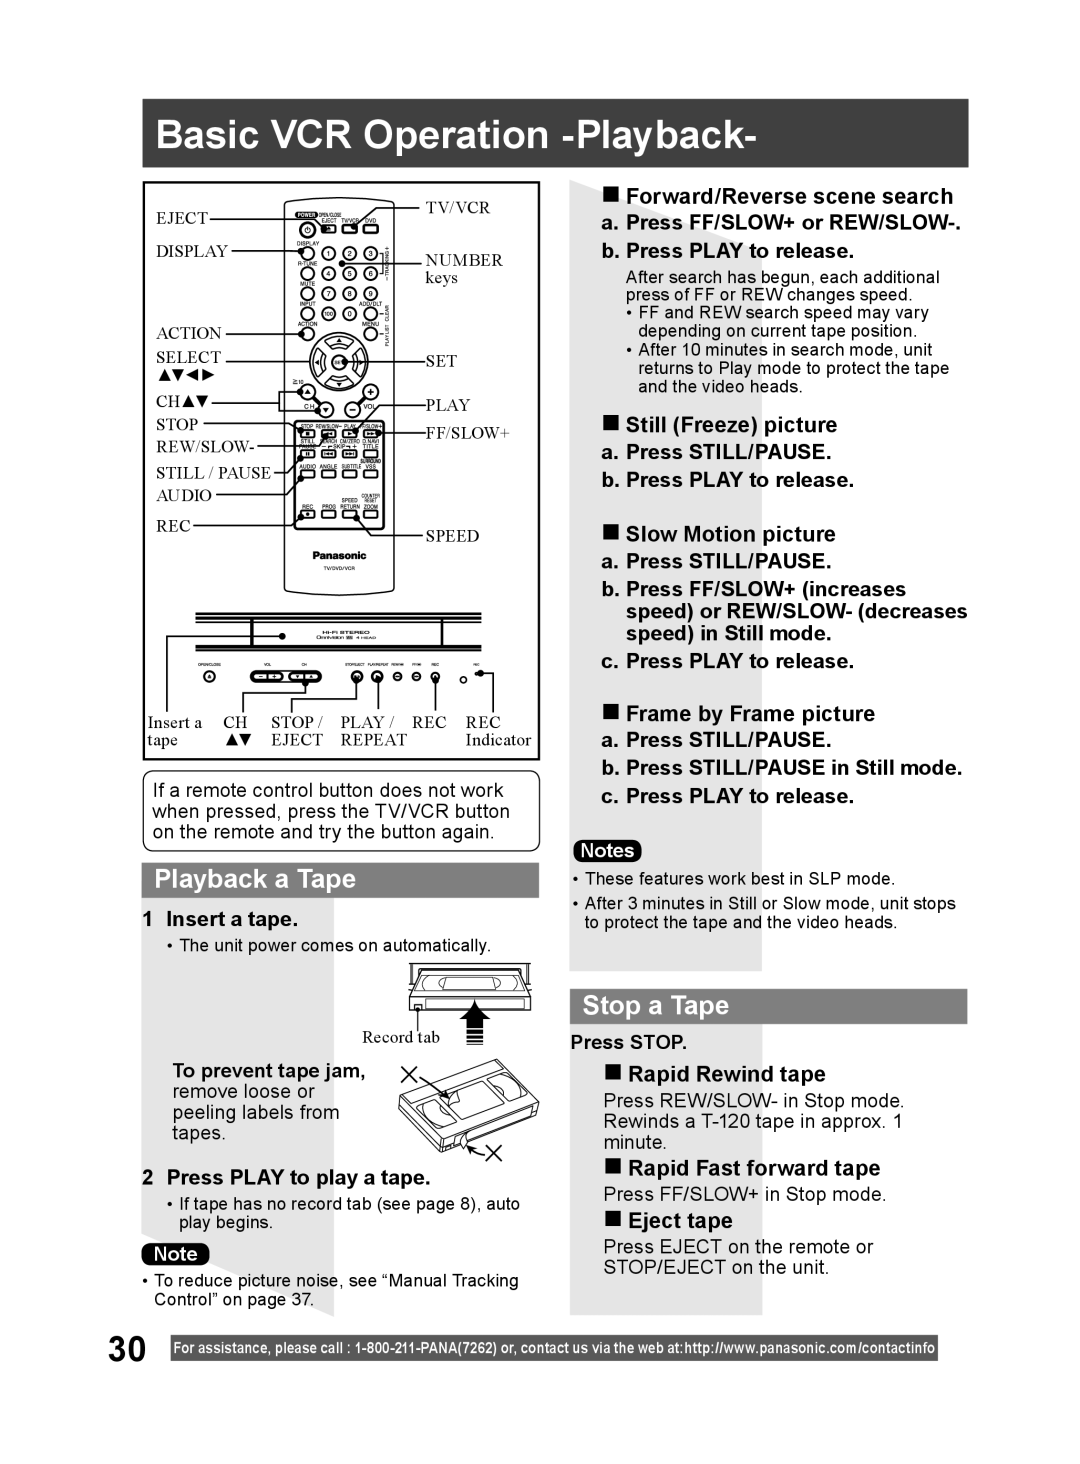 Panasonic PV DF2004 Basic VCR Operation -Playback, Playback a Tape, Stop a Tape, Insert a tape, b. Press PLAY to release 